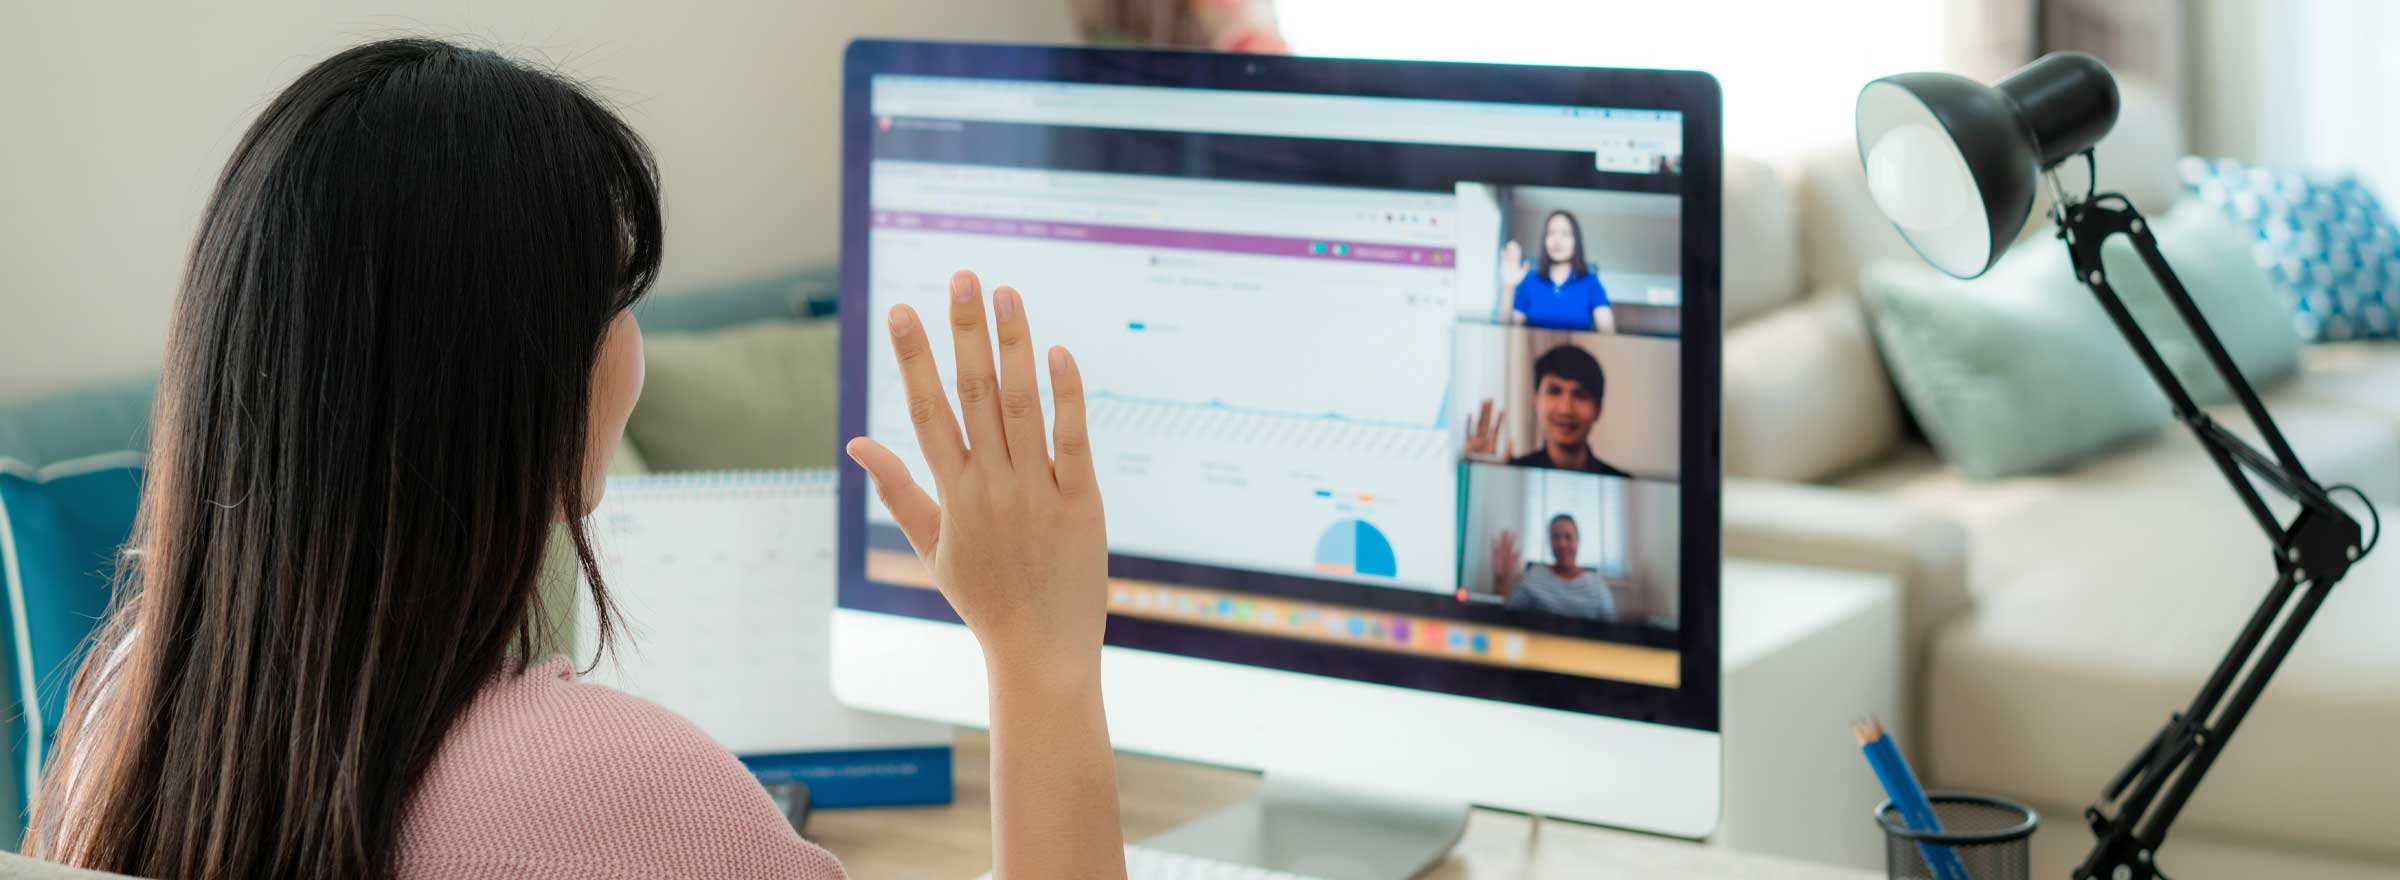 woman waving at people in a video conference